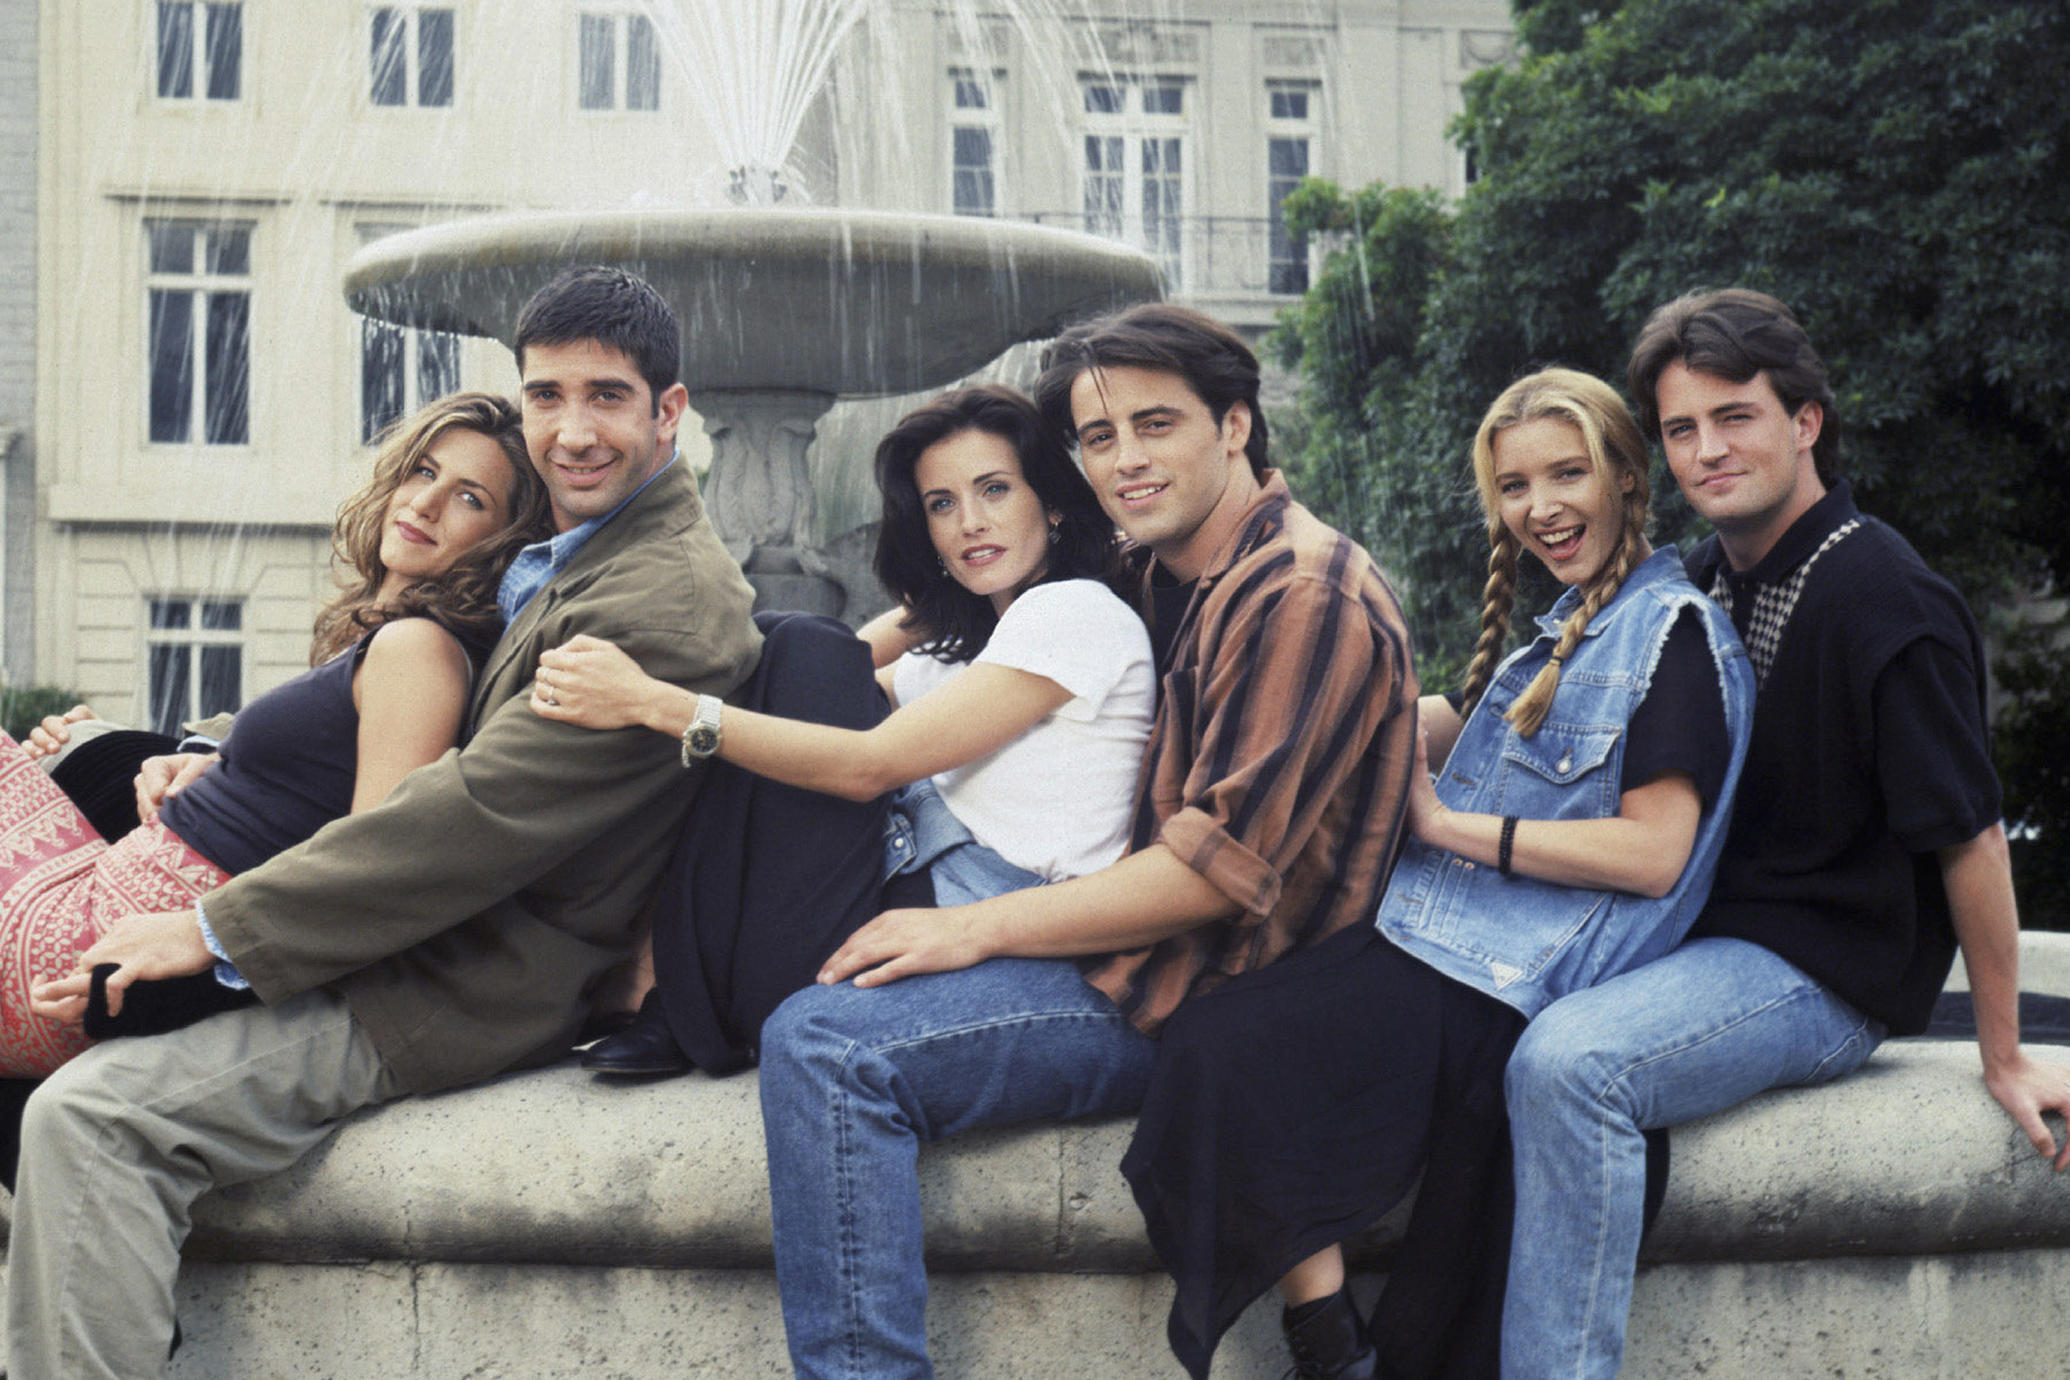 Friends Movie Trailer Is Fake - Today's News: Our Take | TV Guide